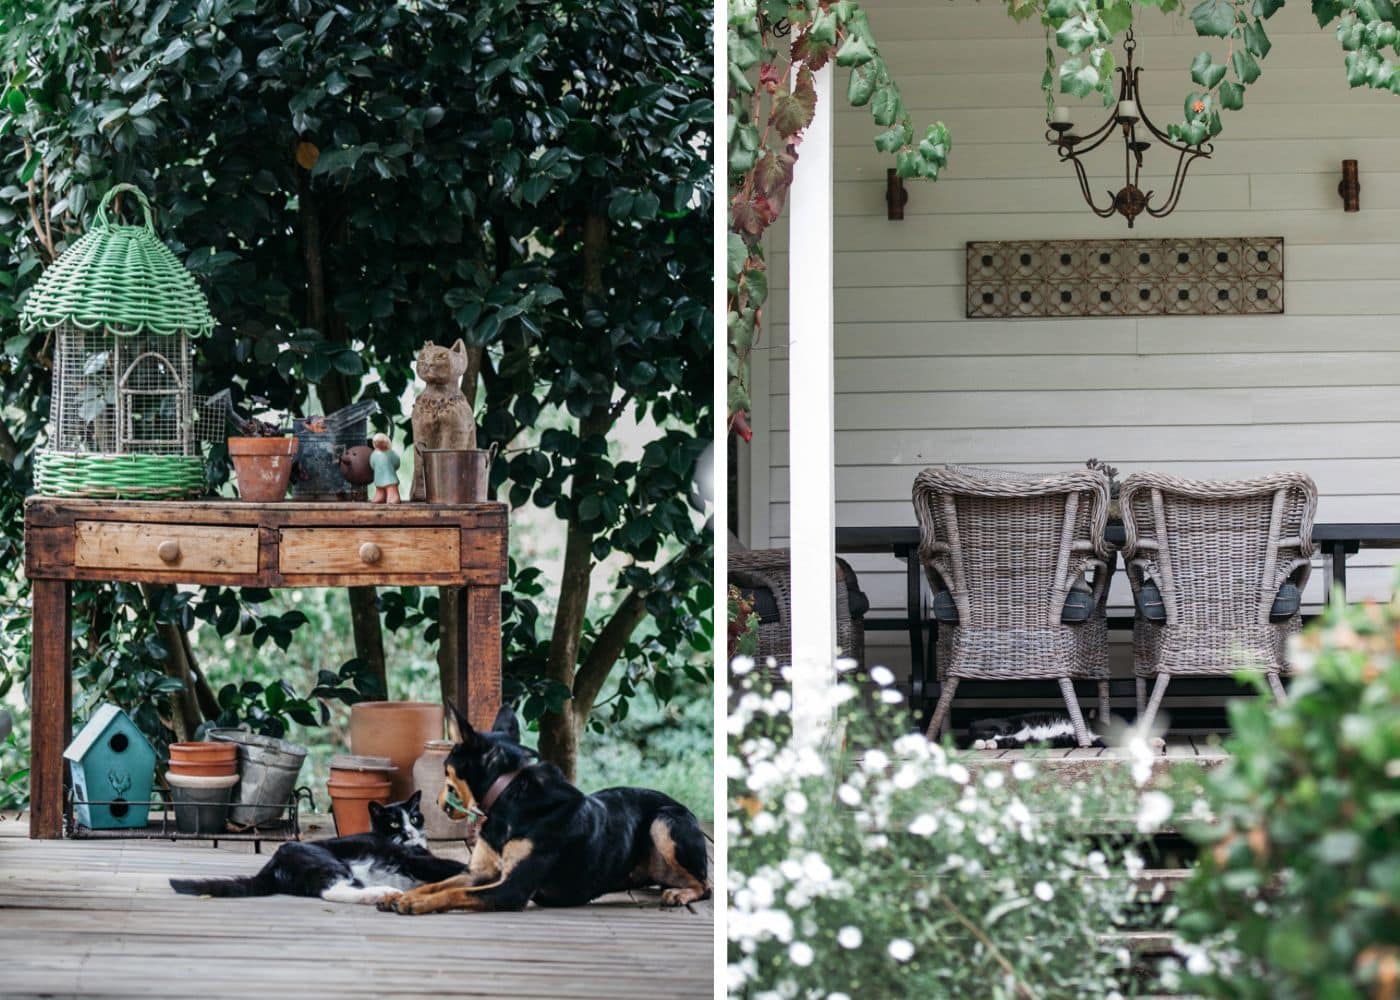 Old wooden table on a verandah with various niknaks including an old birdcage. Dog at cat lounging underneath.